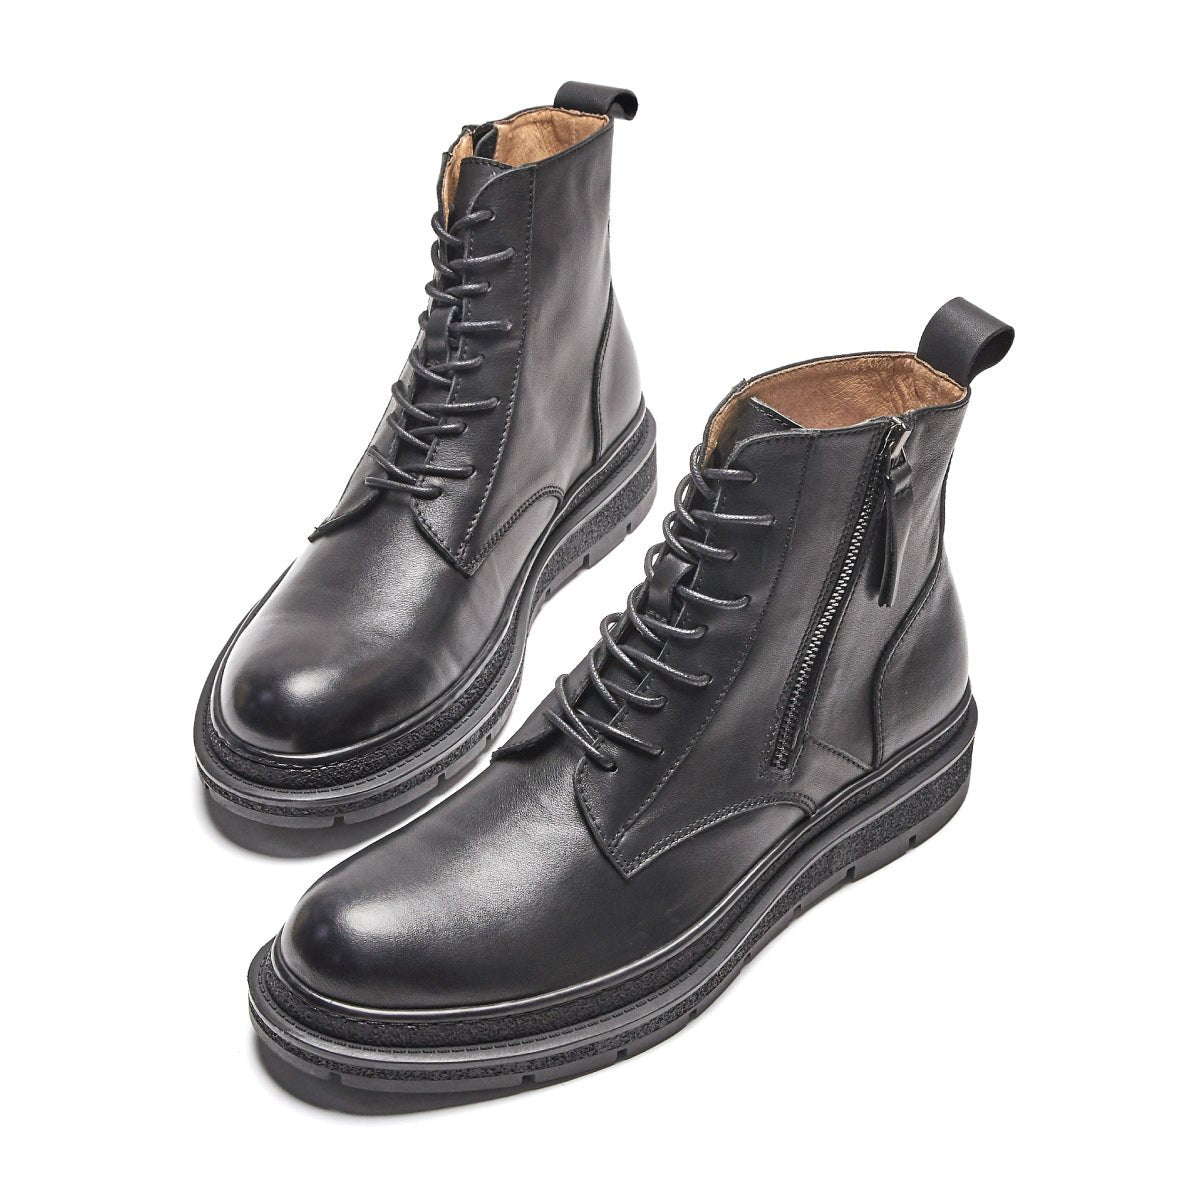 Handsome Heritage Zippers Deco Black Lace Up Leather Boots - 0cm